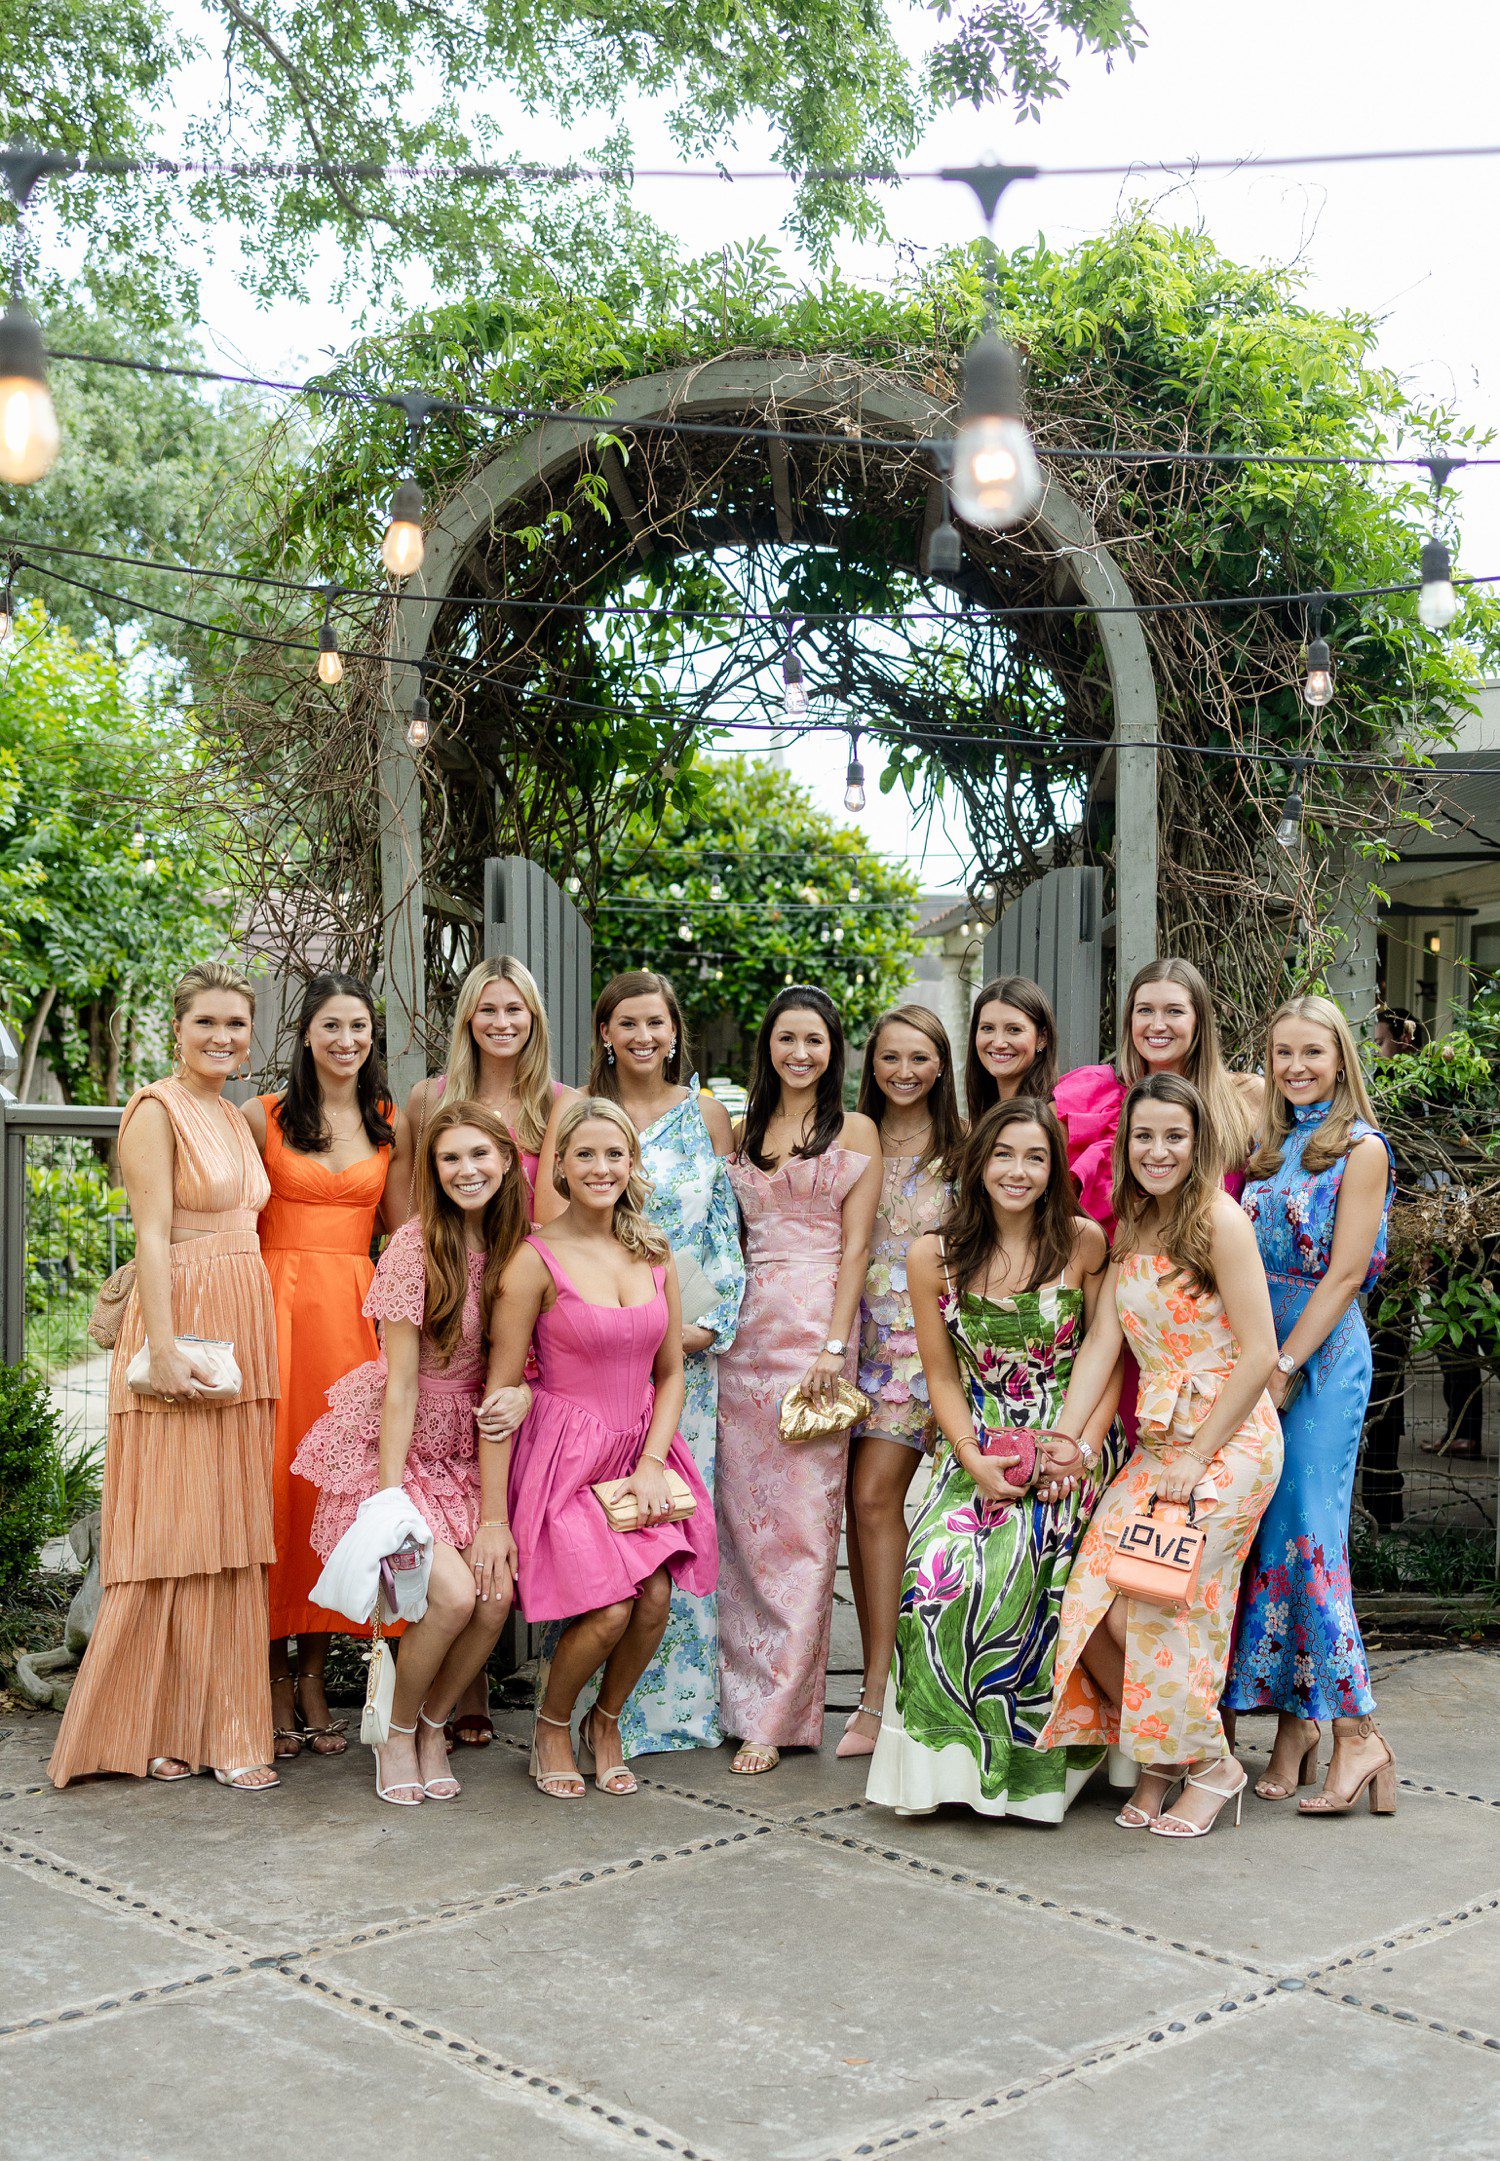 Bride with bridal party at rehearsal dinner in Houston.